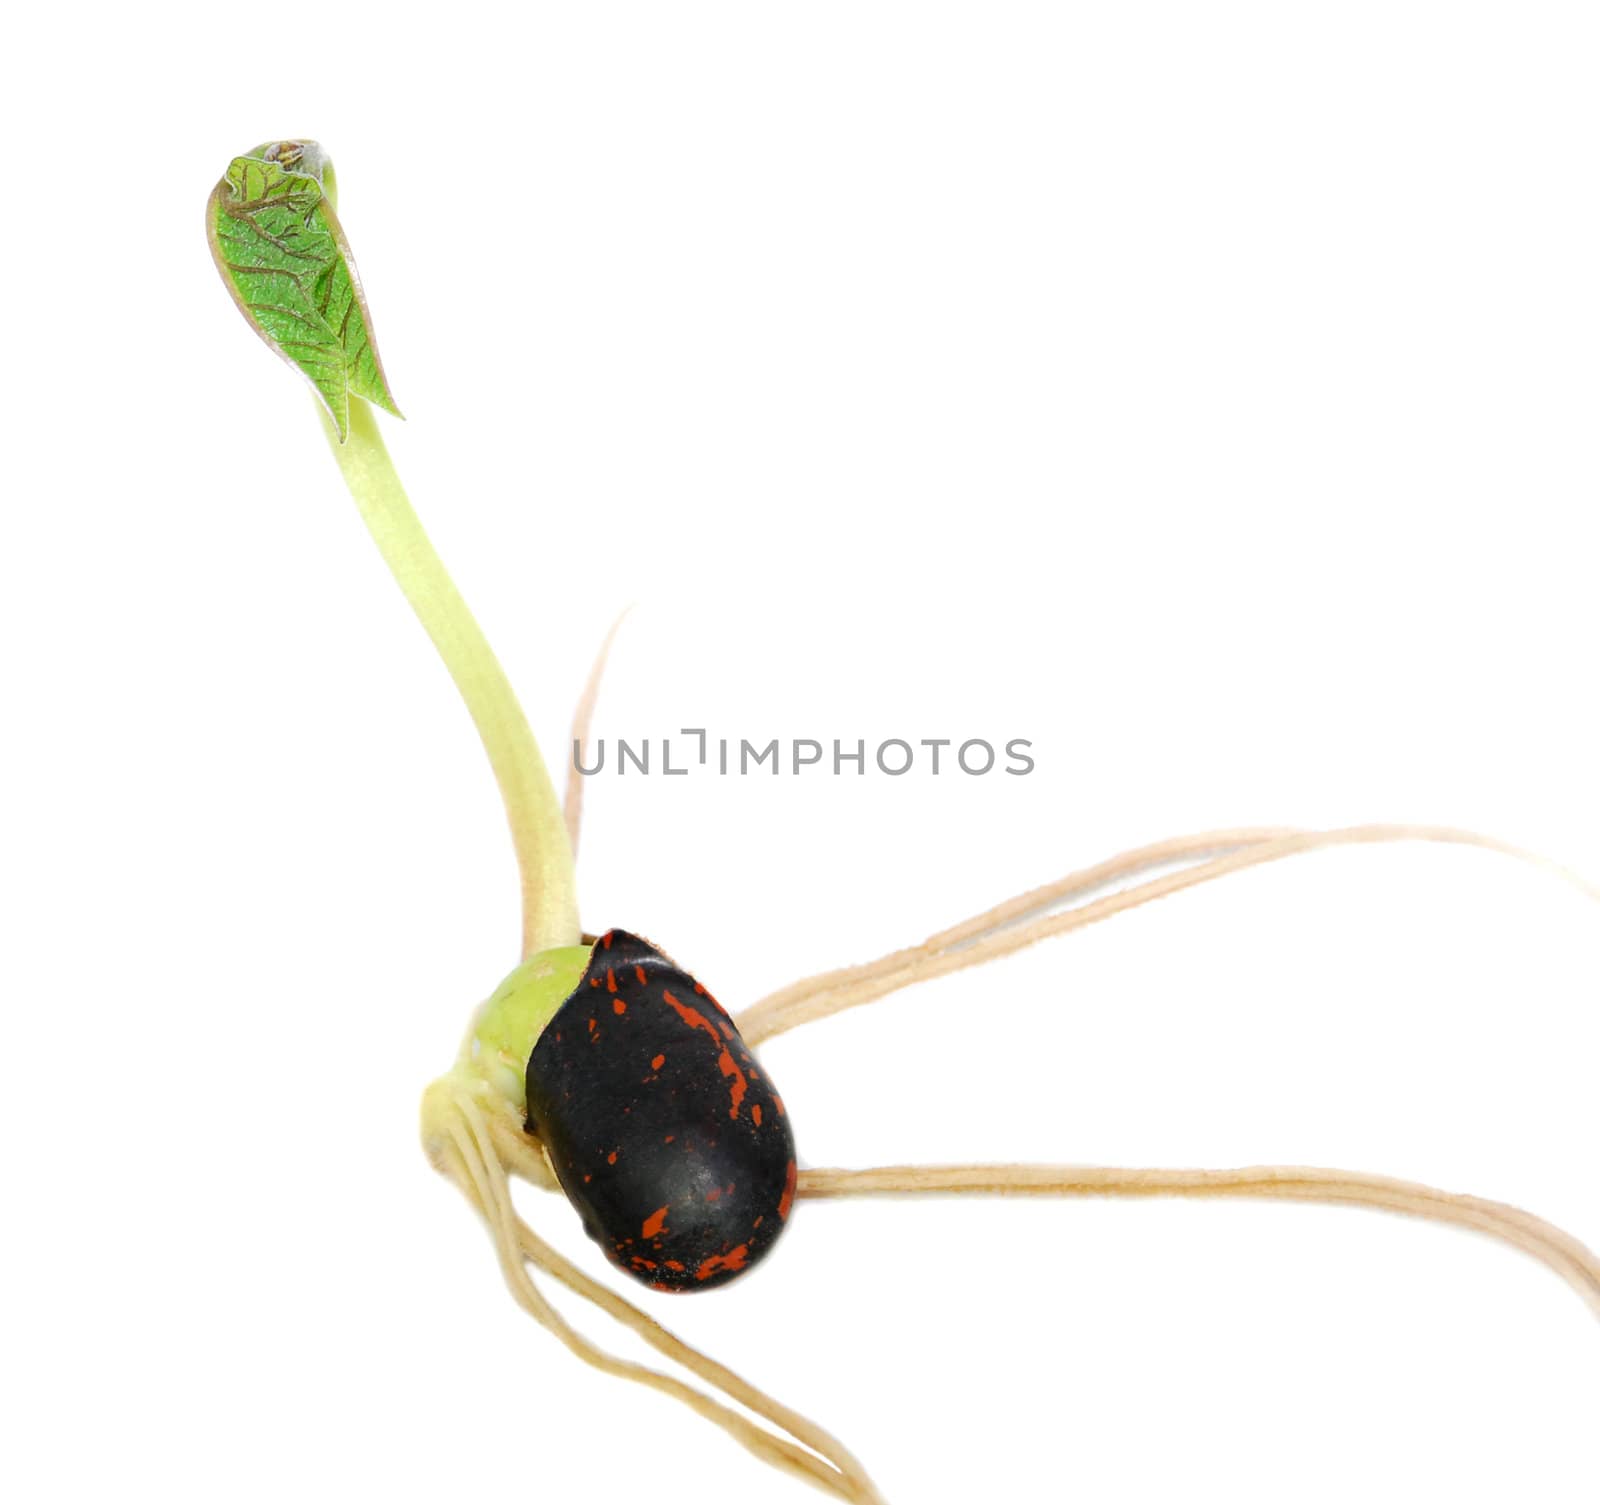 Runner bean seed with a green leaf shoot, isolated on a white background